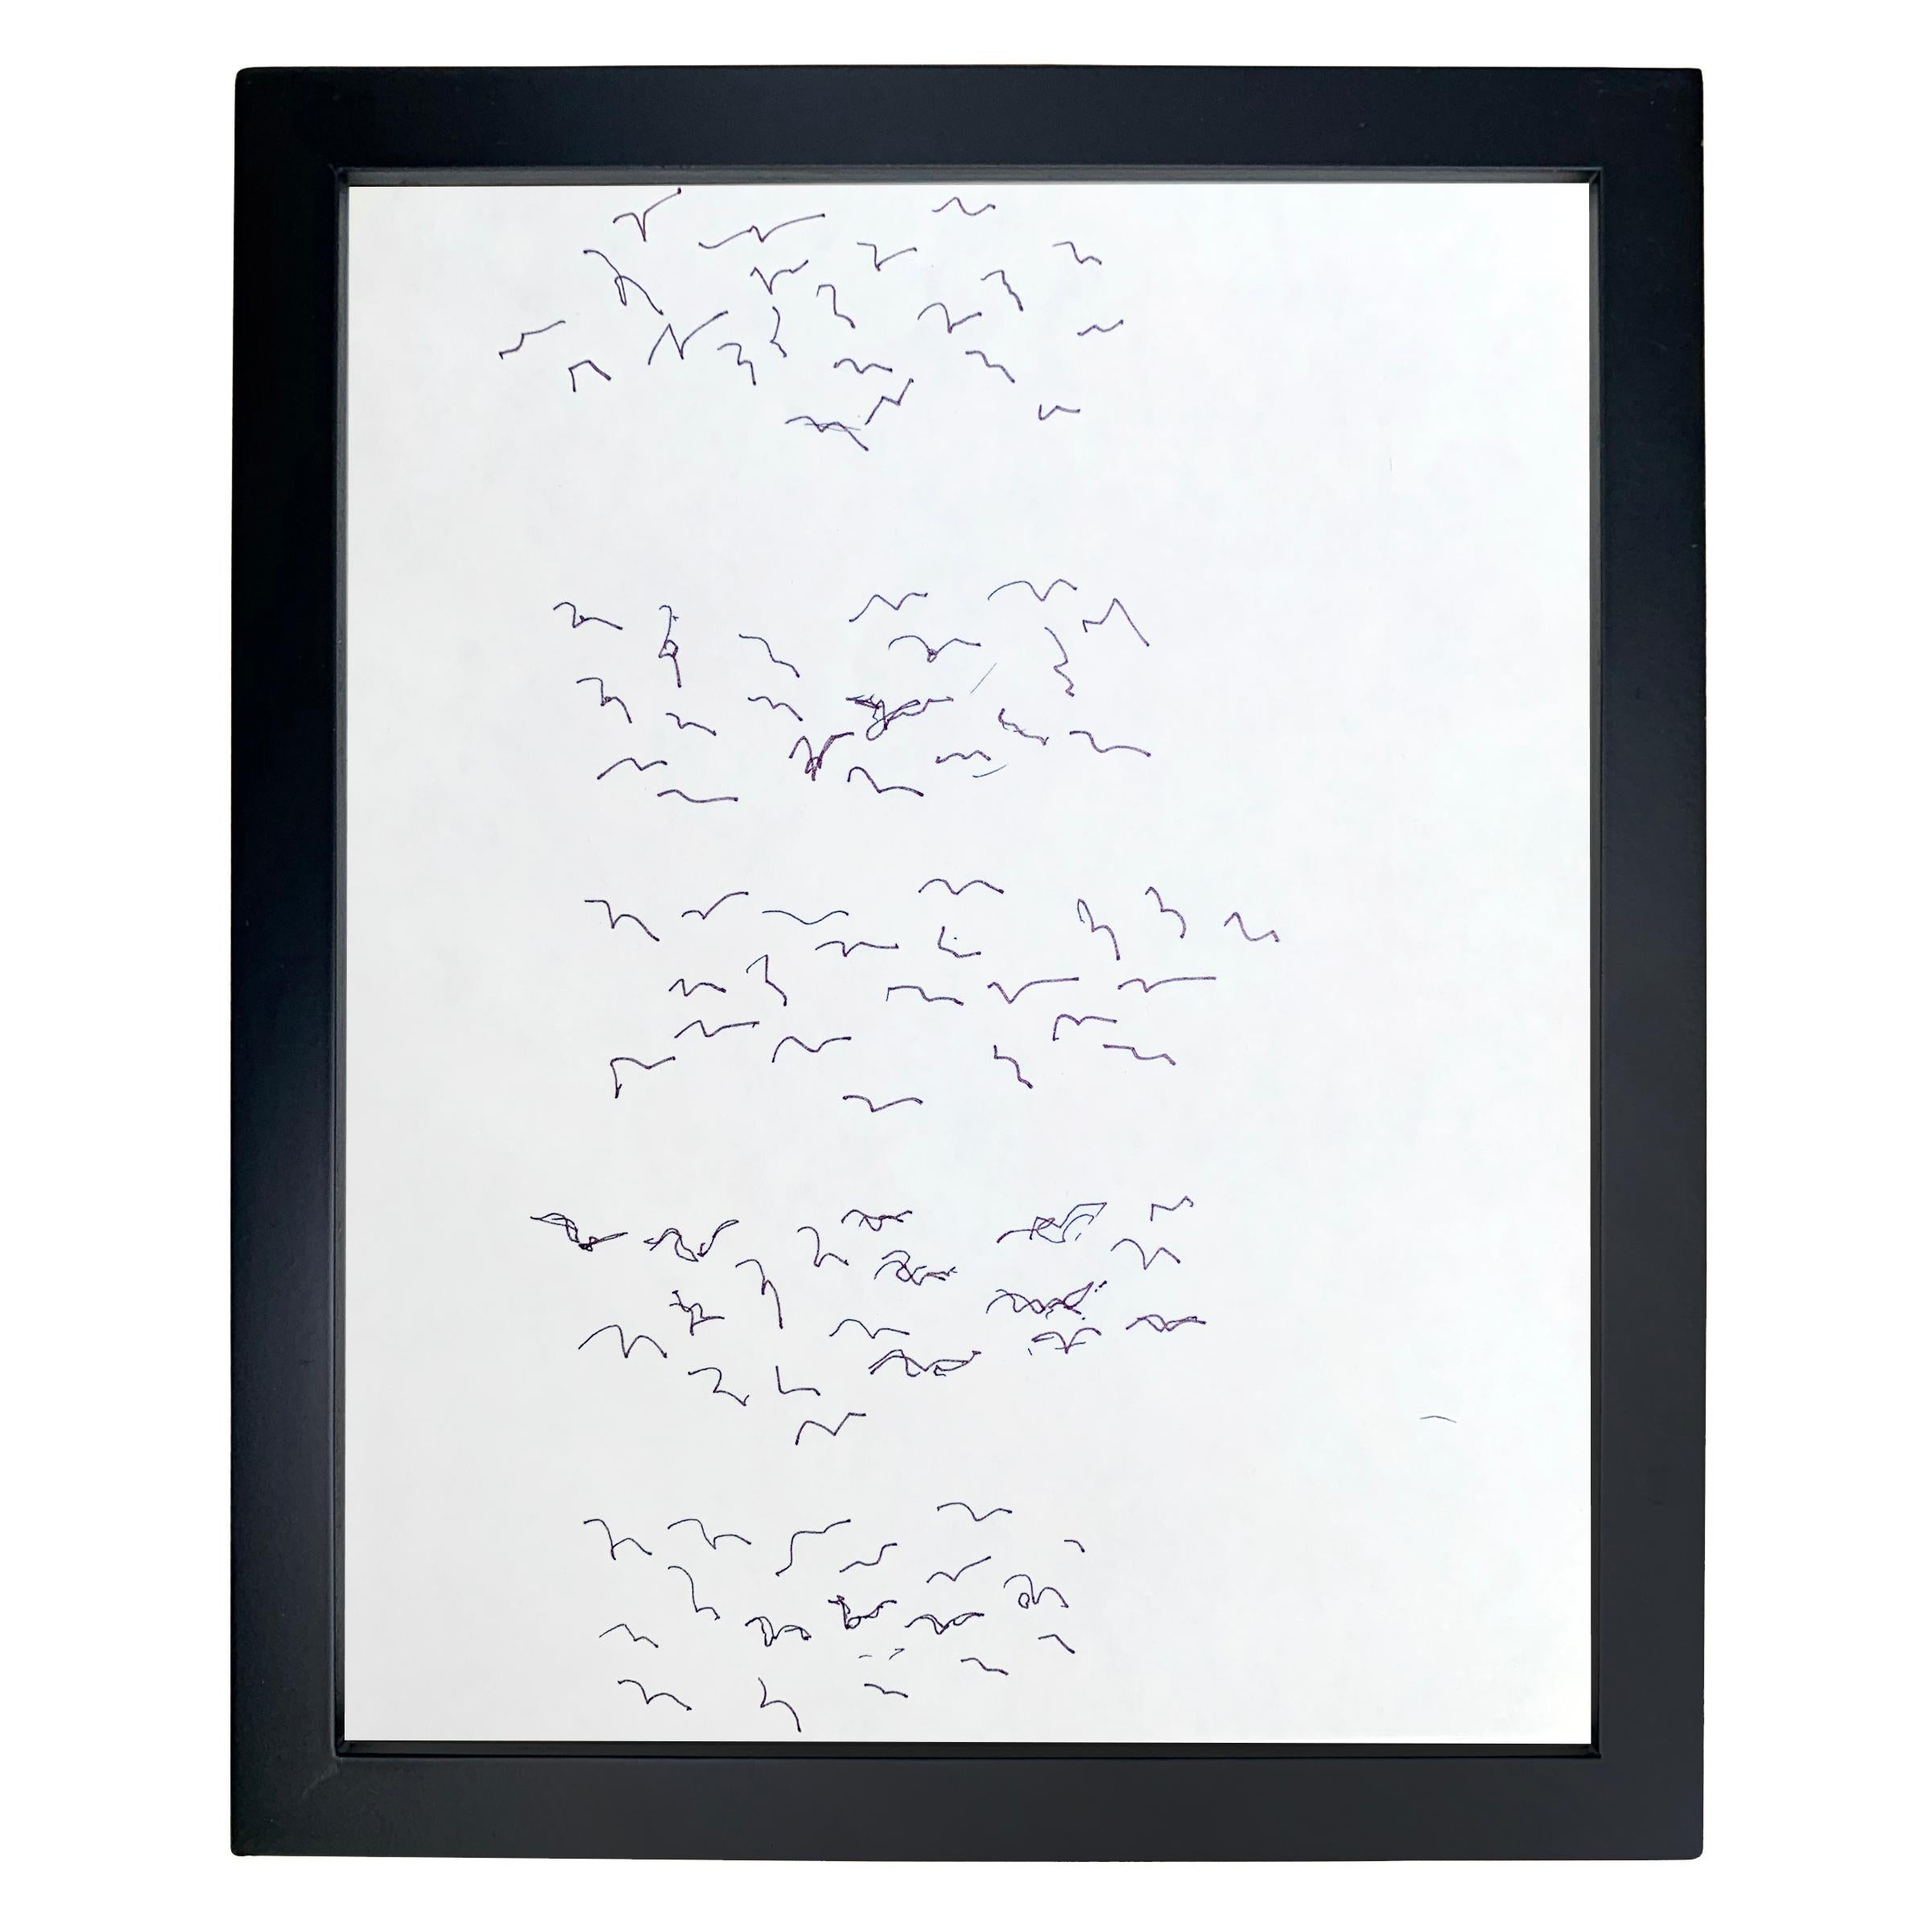 A set of three framed gestural drawings by Paul Chidlaw (1900-1989) depicting flocks of birds rendered in black ink on paper. 

Paul Chidlaw was an early proponent of abstract expressionism and had a long and distinguished career in Cincinnati,